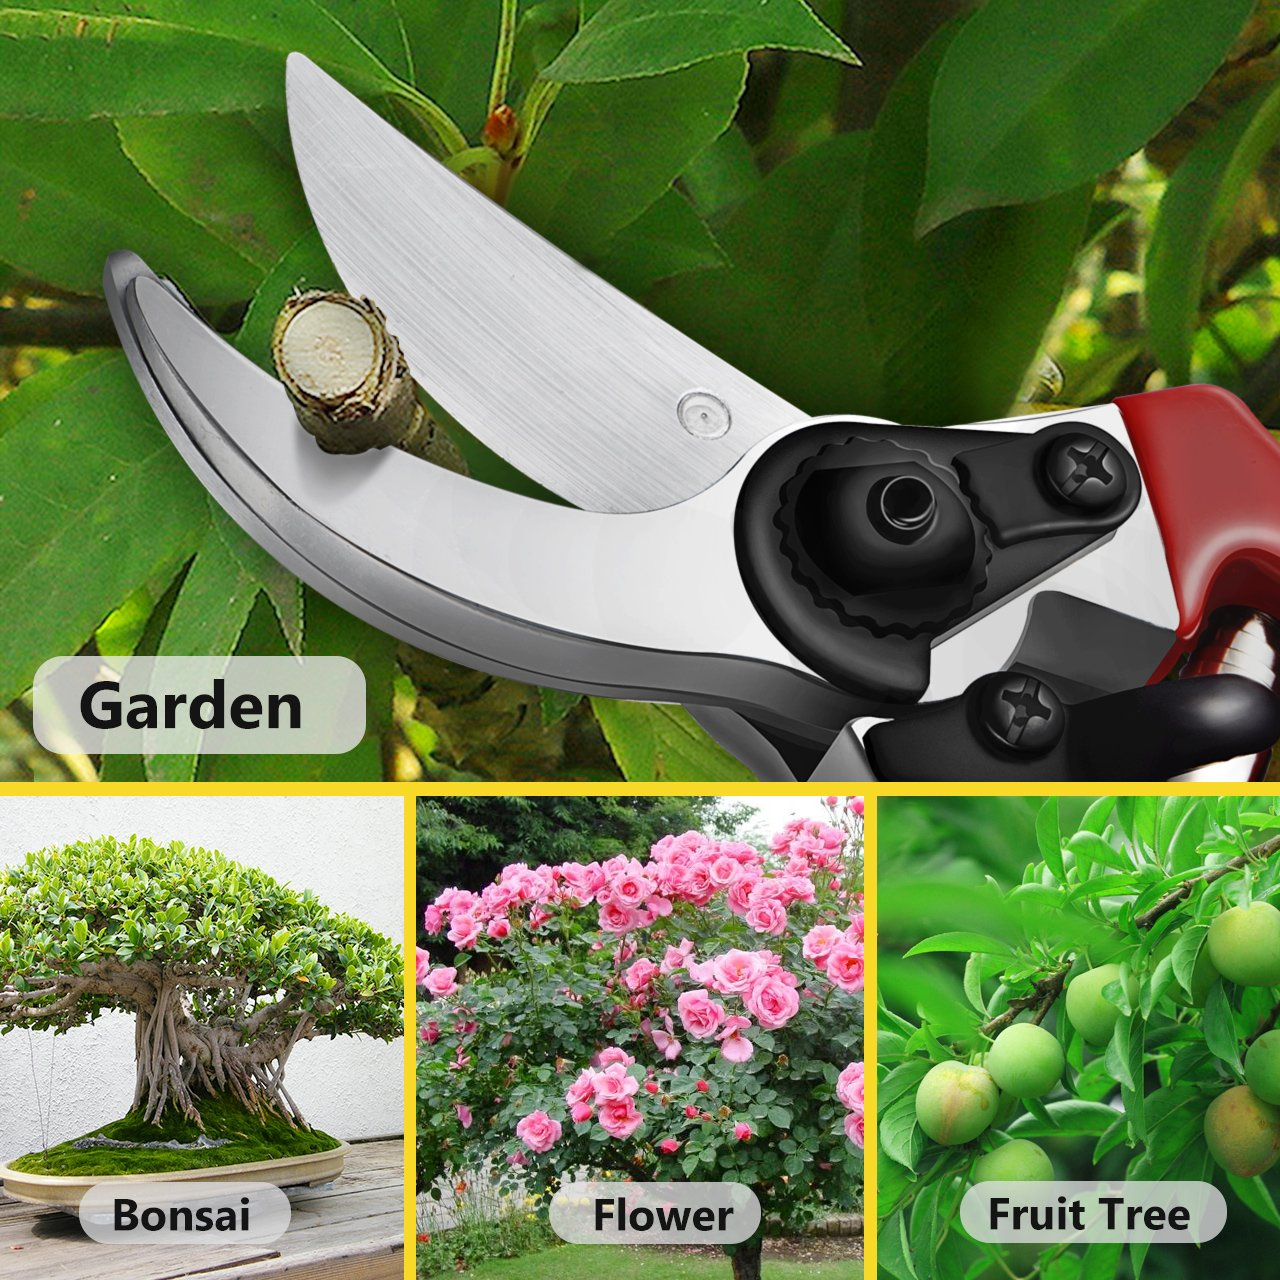 CyberGenZ Bypass Pruning Shears - 8 Garden Shears Pruning, Heavy Duty  Garden Clippers Handheld with Blue Adjustable Grip, Gardening Pruners Tool  for